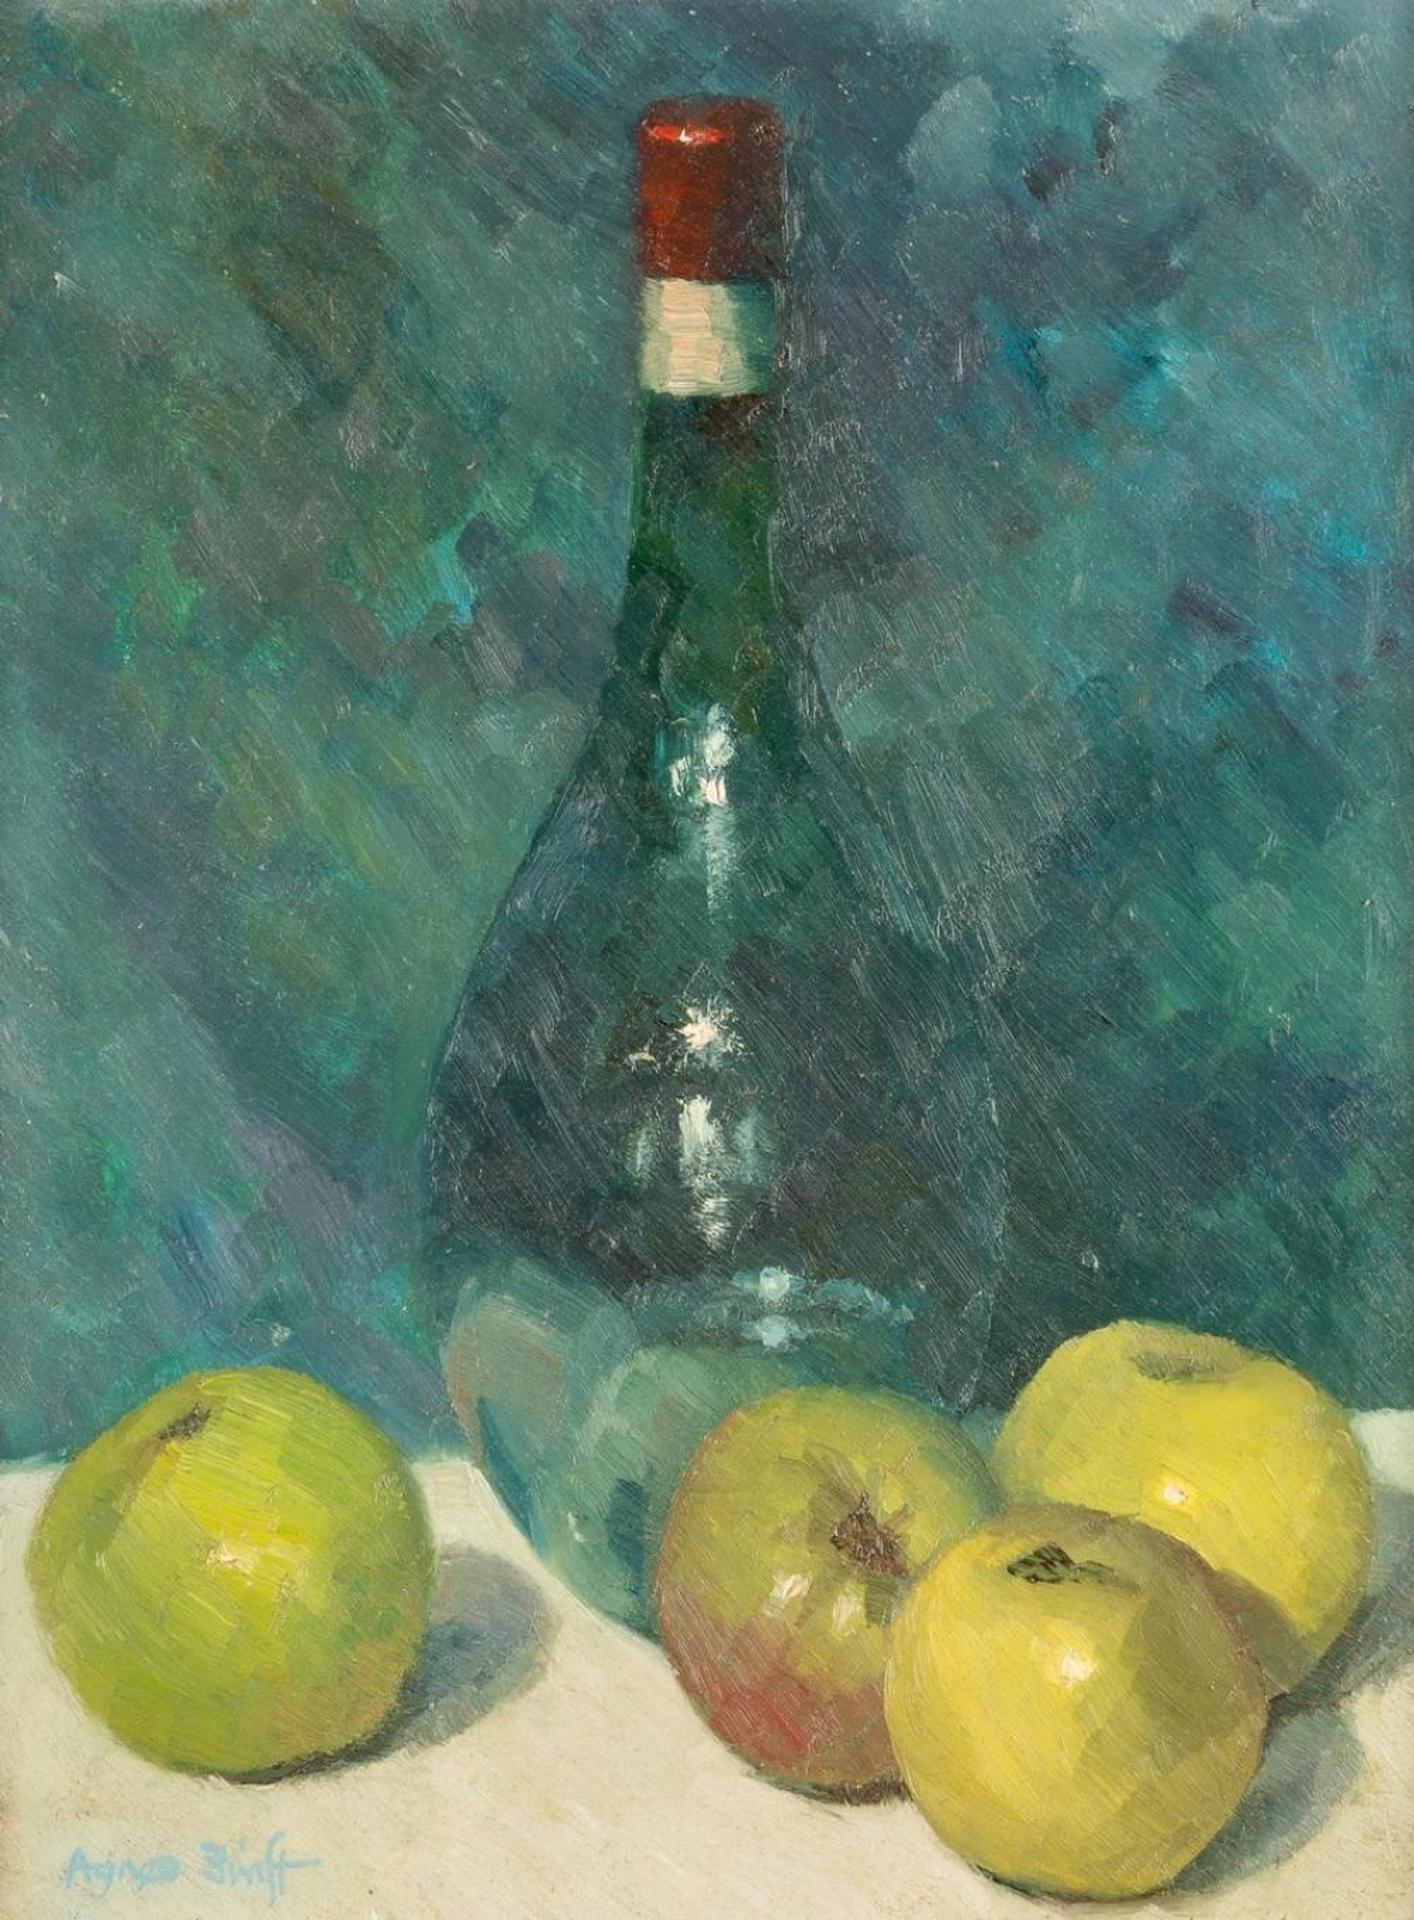 Agnes Swift (1907-1995) - Apples with a Green Bottle